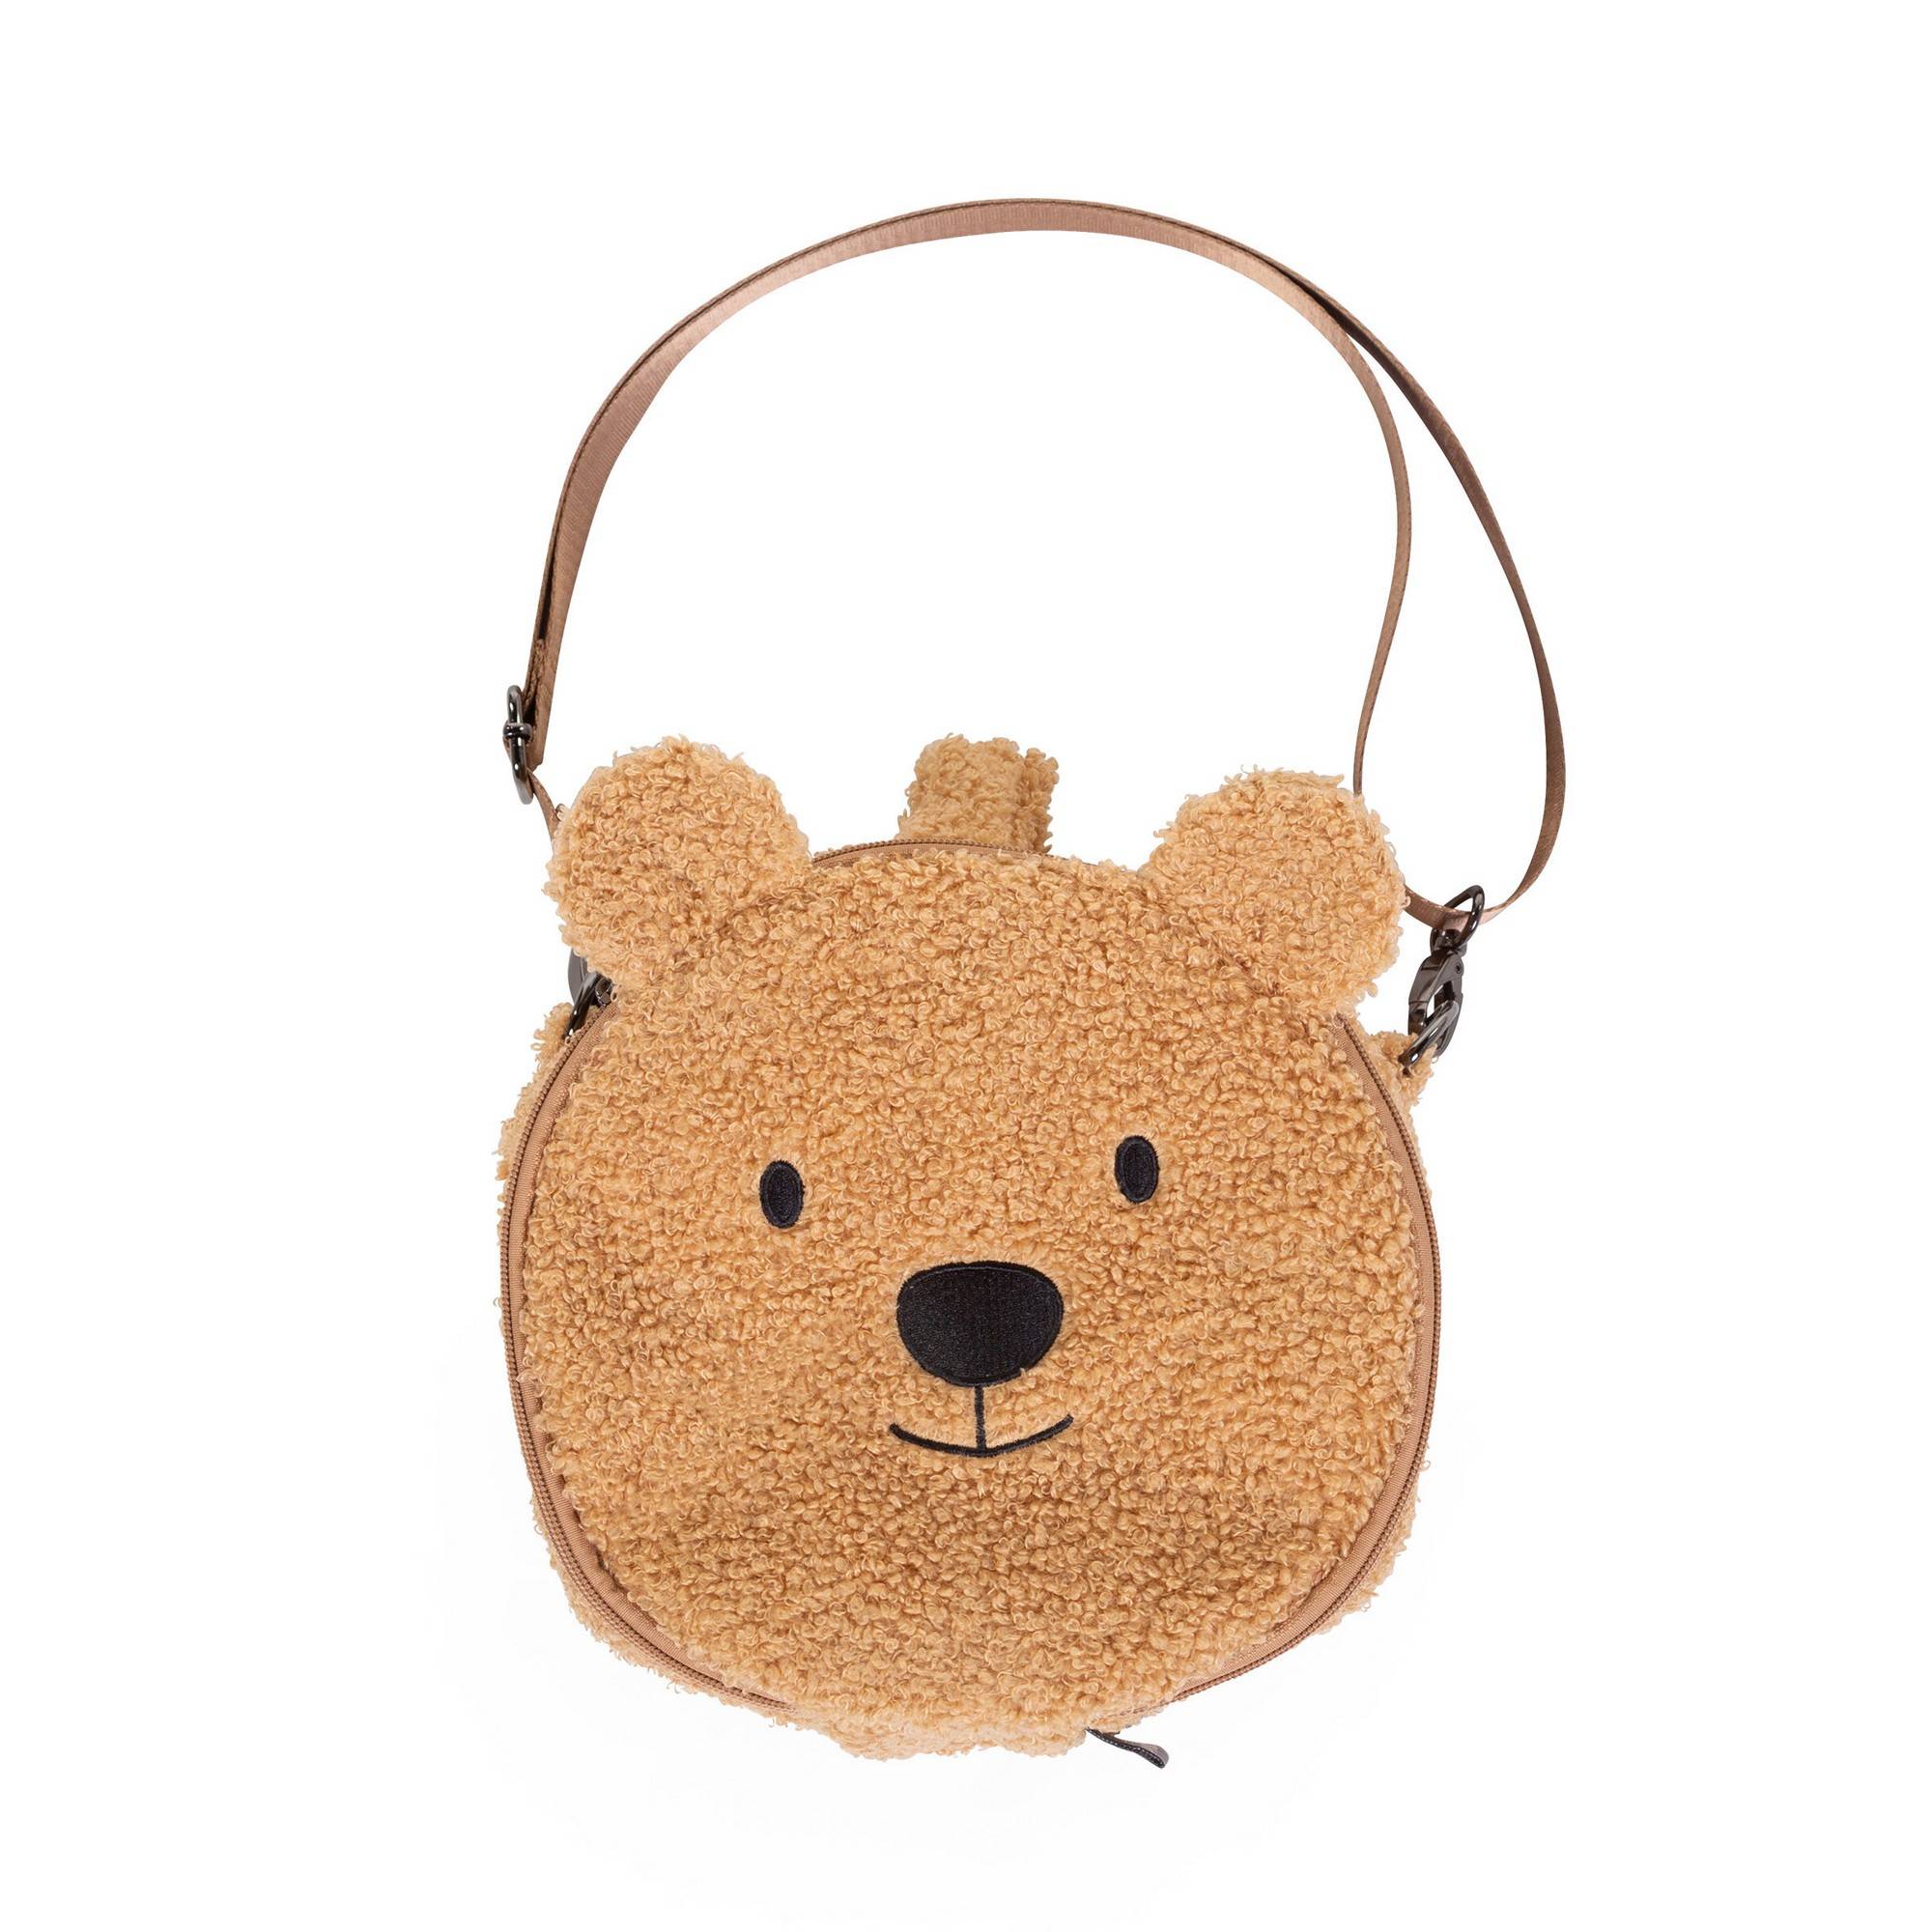 Claire's Club Sherpa Brown Bear Crossbody Bag Little Girls Fluffy Purse  with Gold Shoulder Strap, Zip Closure, Gift Idea for Girls Age 3+ :  Amazon.co.uk: Fashion